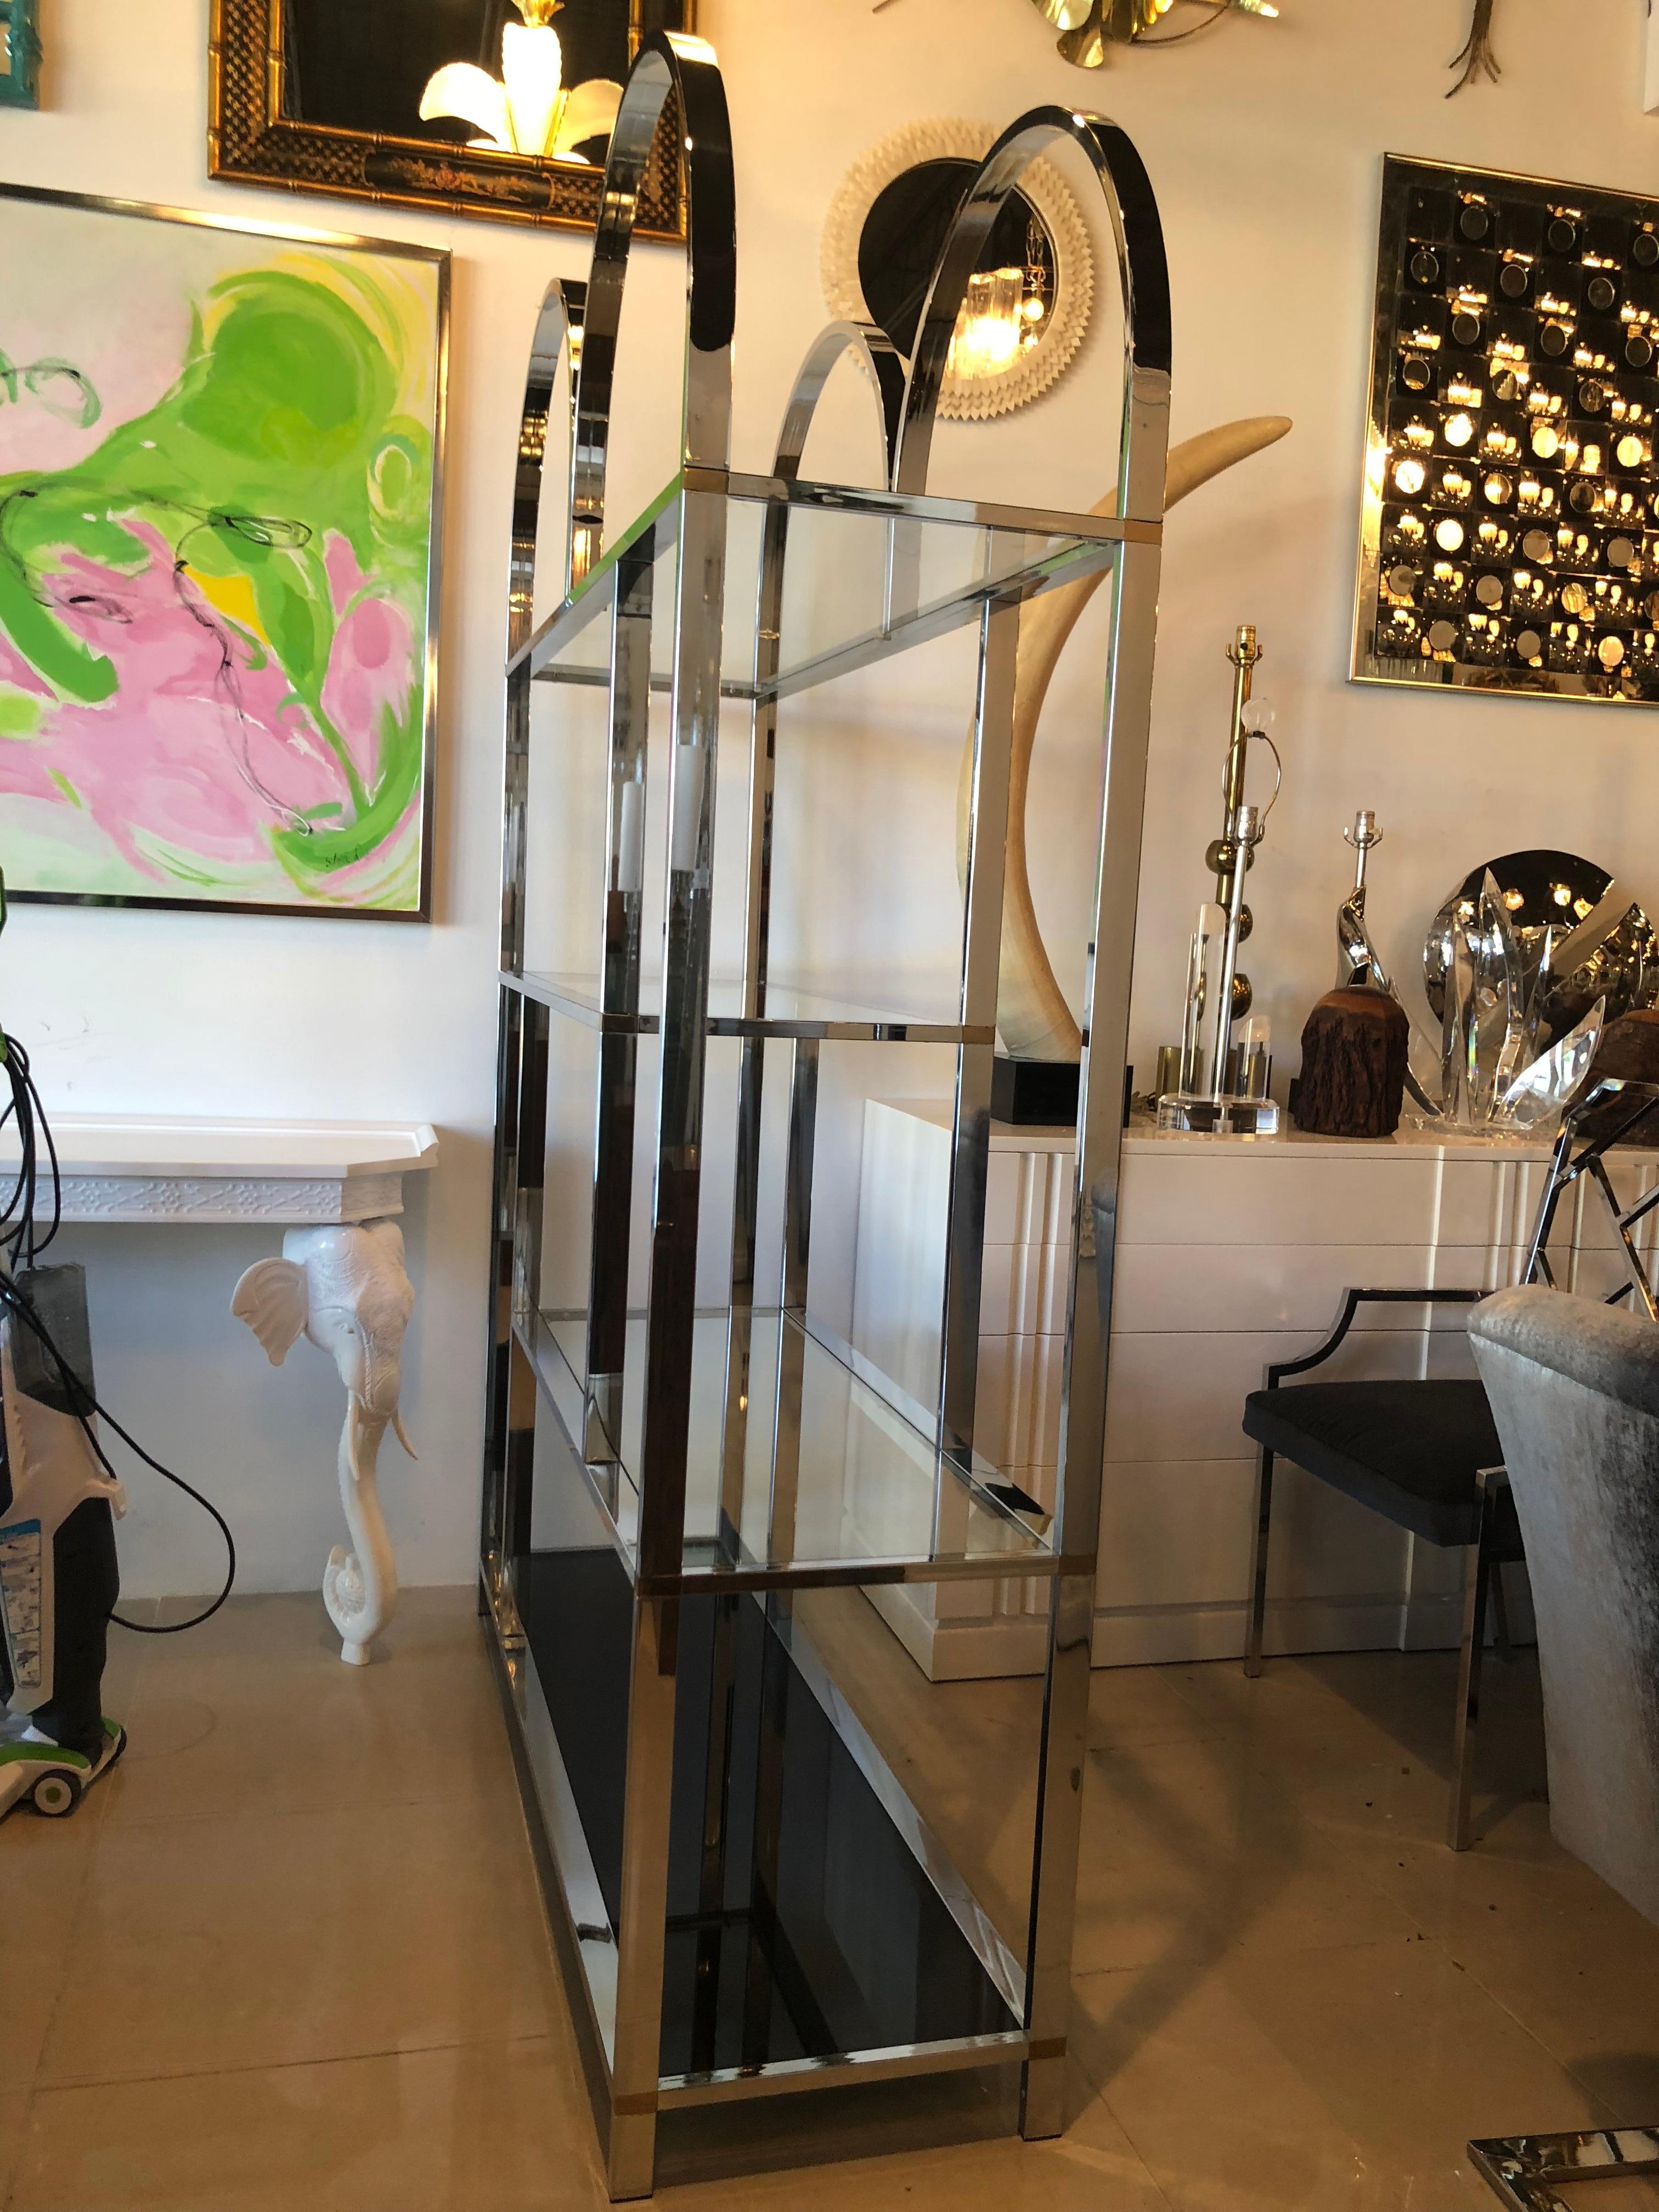 Vintage Chrome and Brass Etagere Arched Glass Display Shelf Shelves In Good Condition For Sale In West Palm Beach, FL